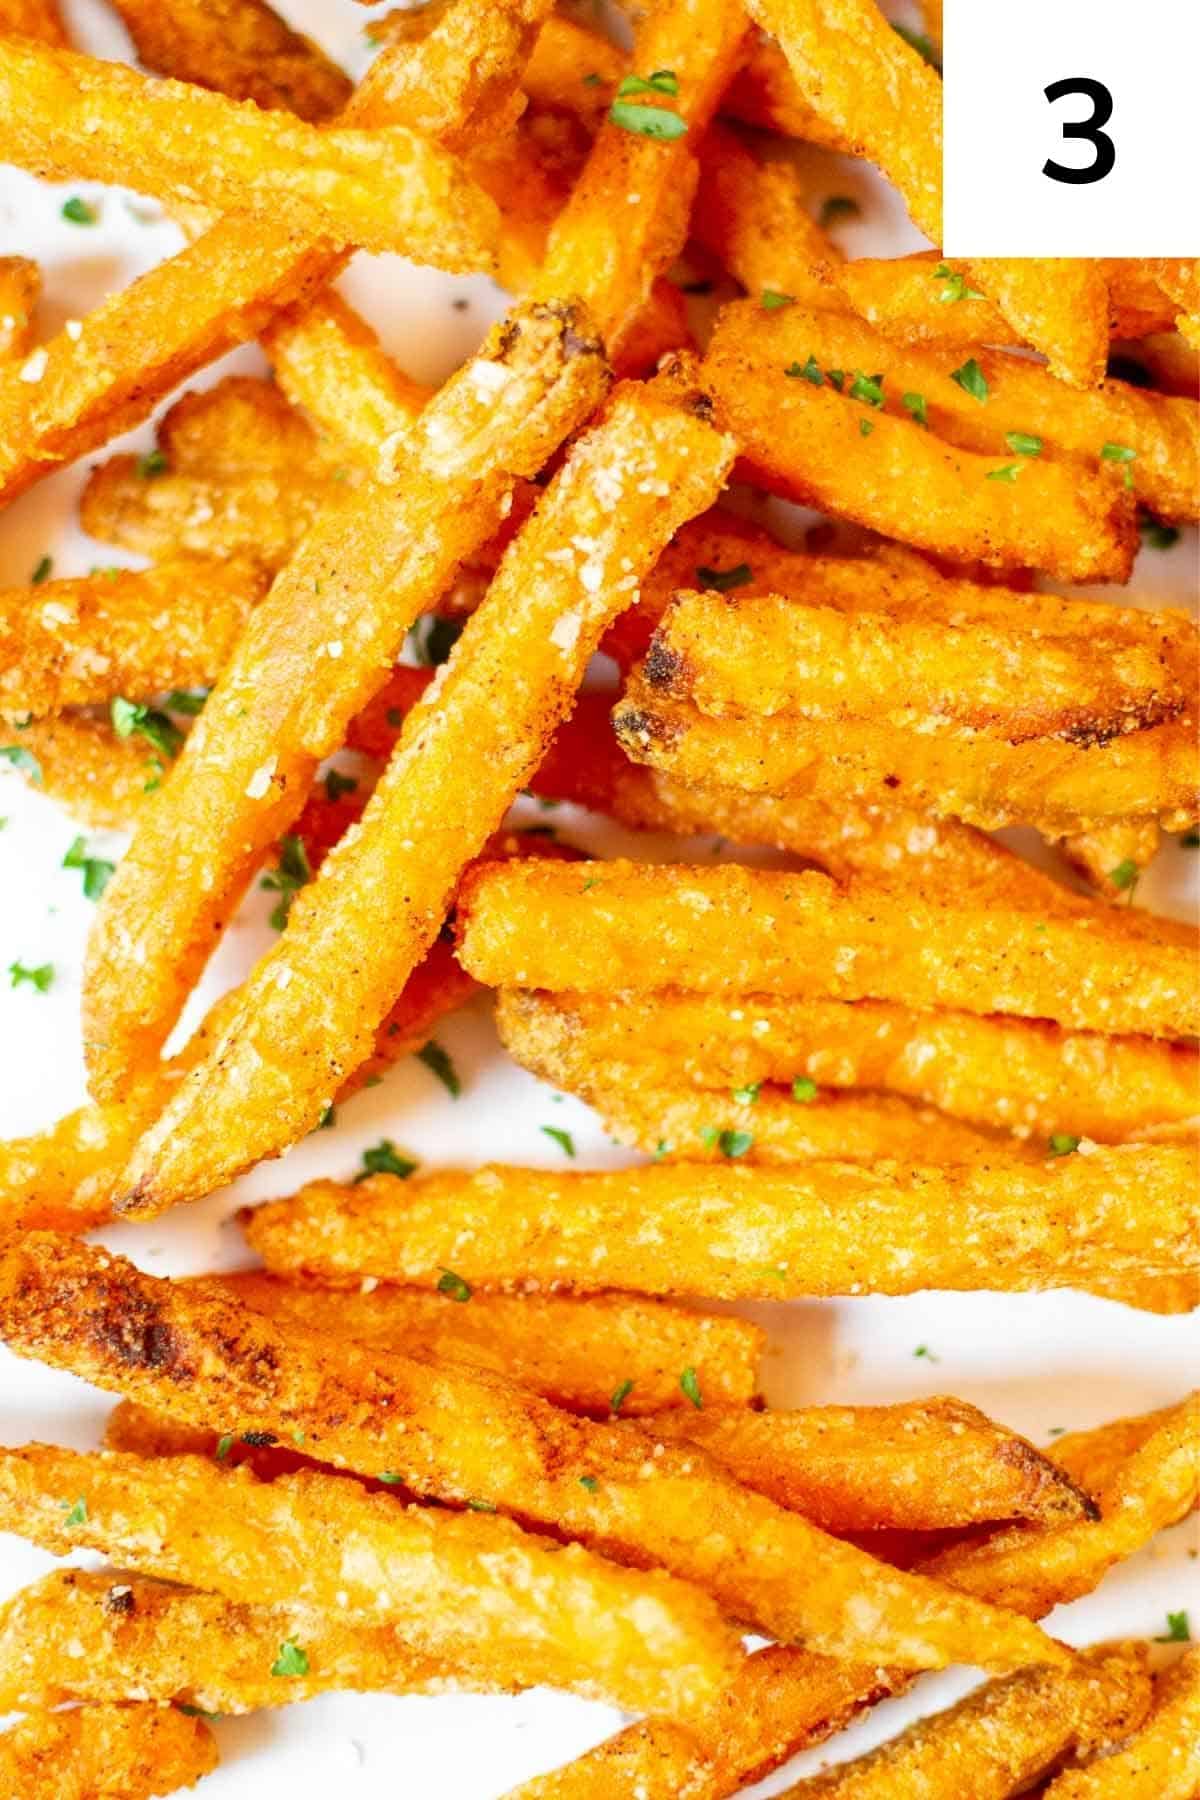 Cooked sweet potato fries with salt and parsley.